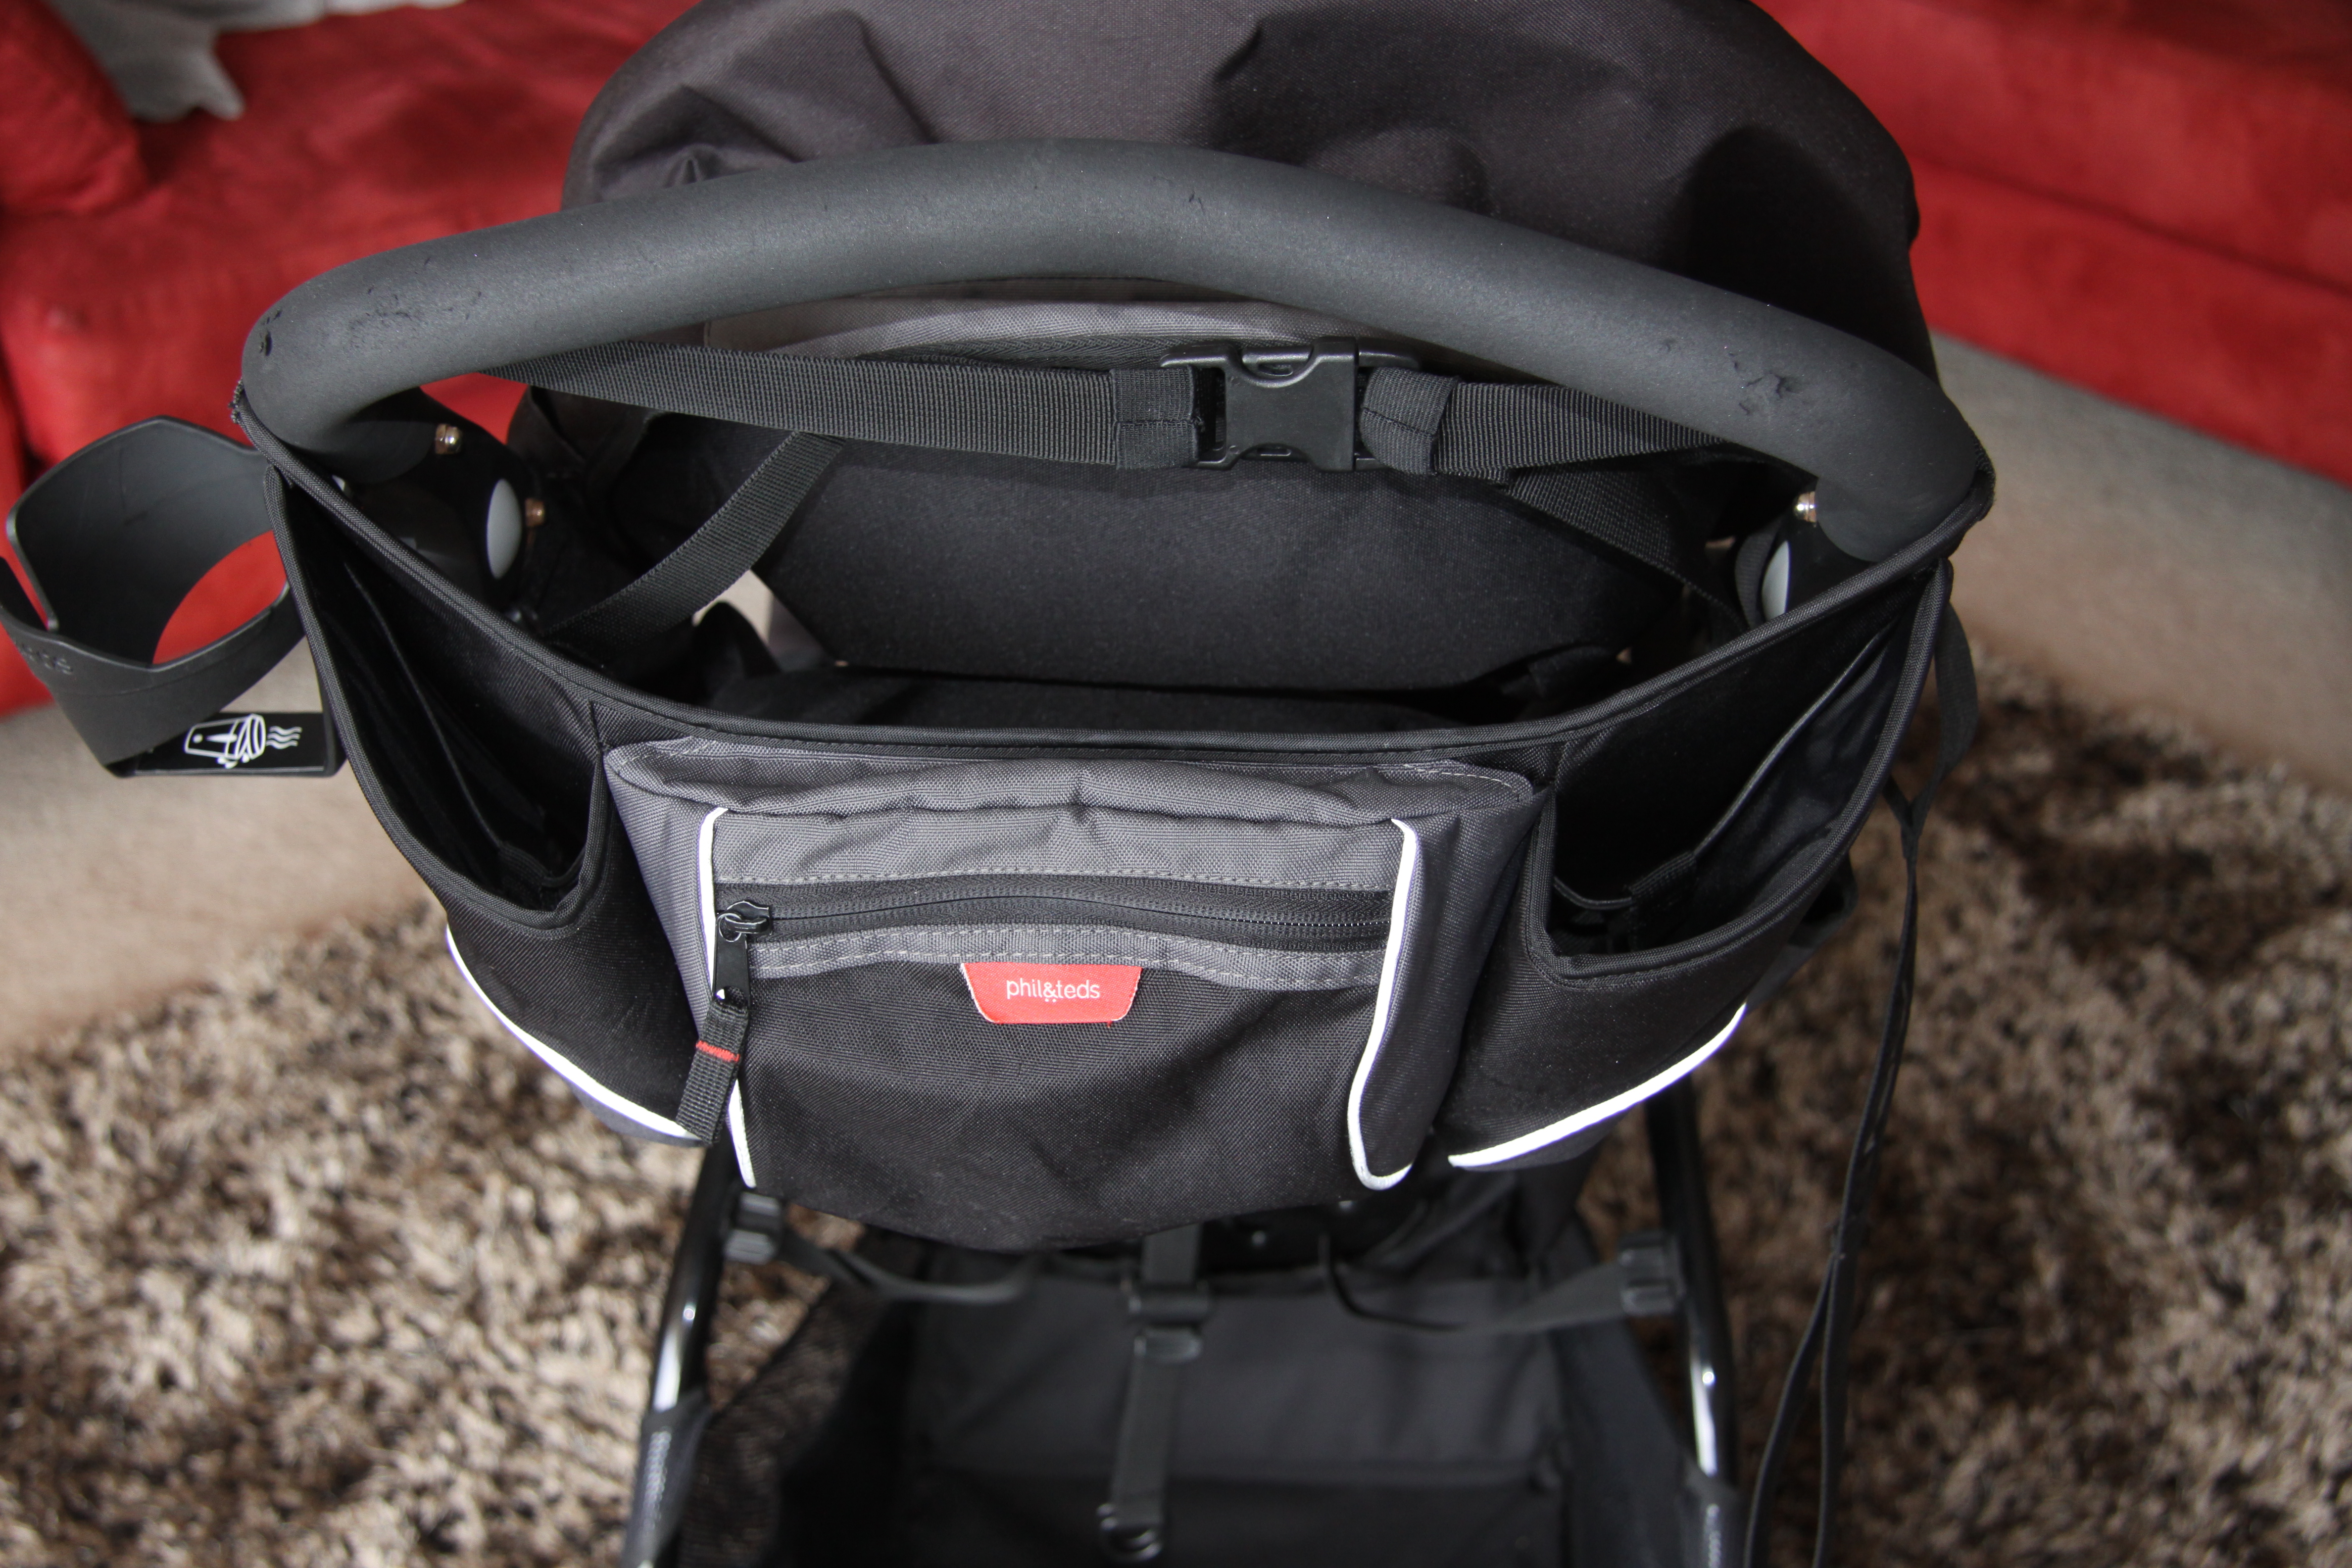 phil and teds stroller travel bag